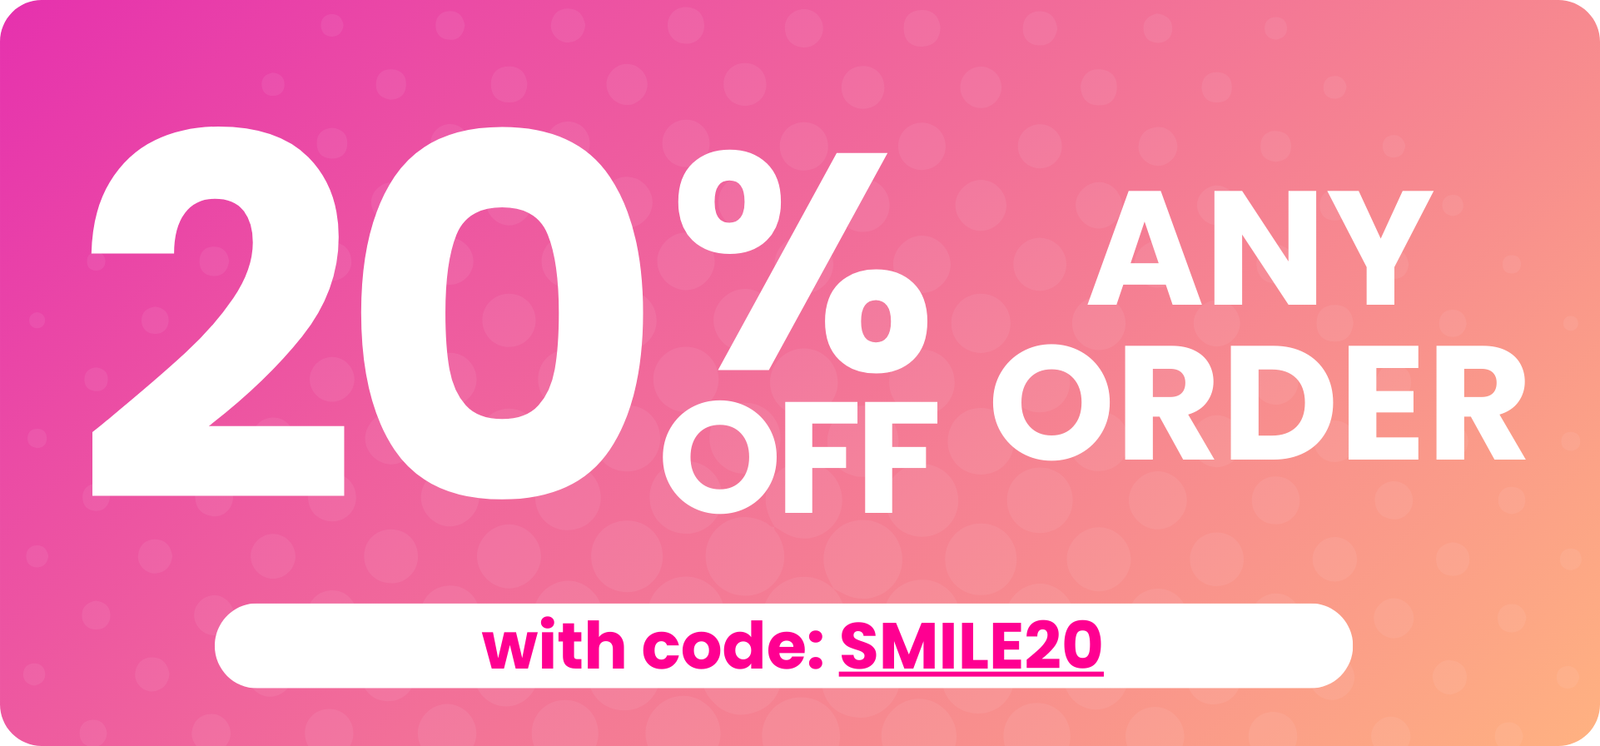 Take 20% OFF any order with code: SMILE20